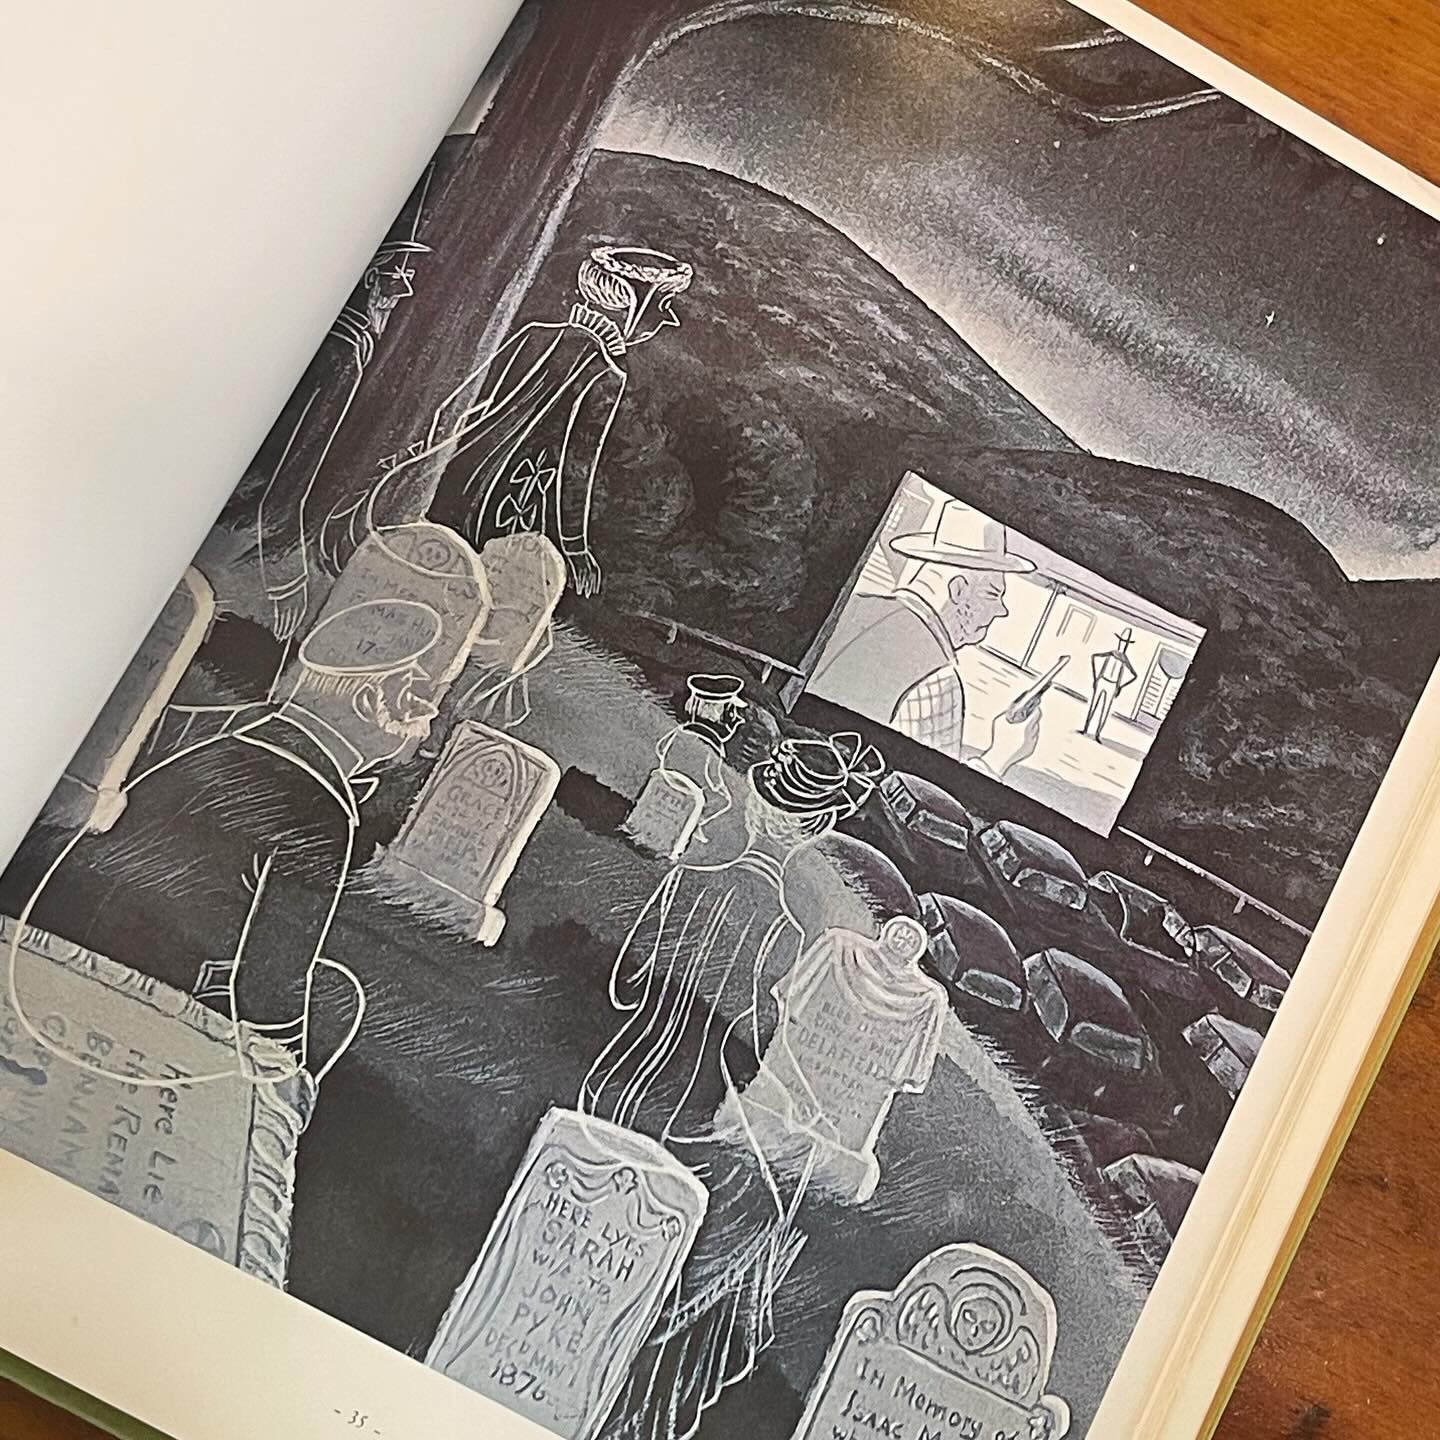 Antique { The Groaning Board } Charles Addams Hardcover Book 1st Edition 1964 - Loved To Death